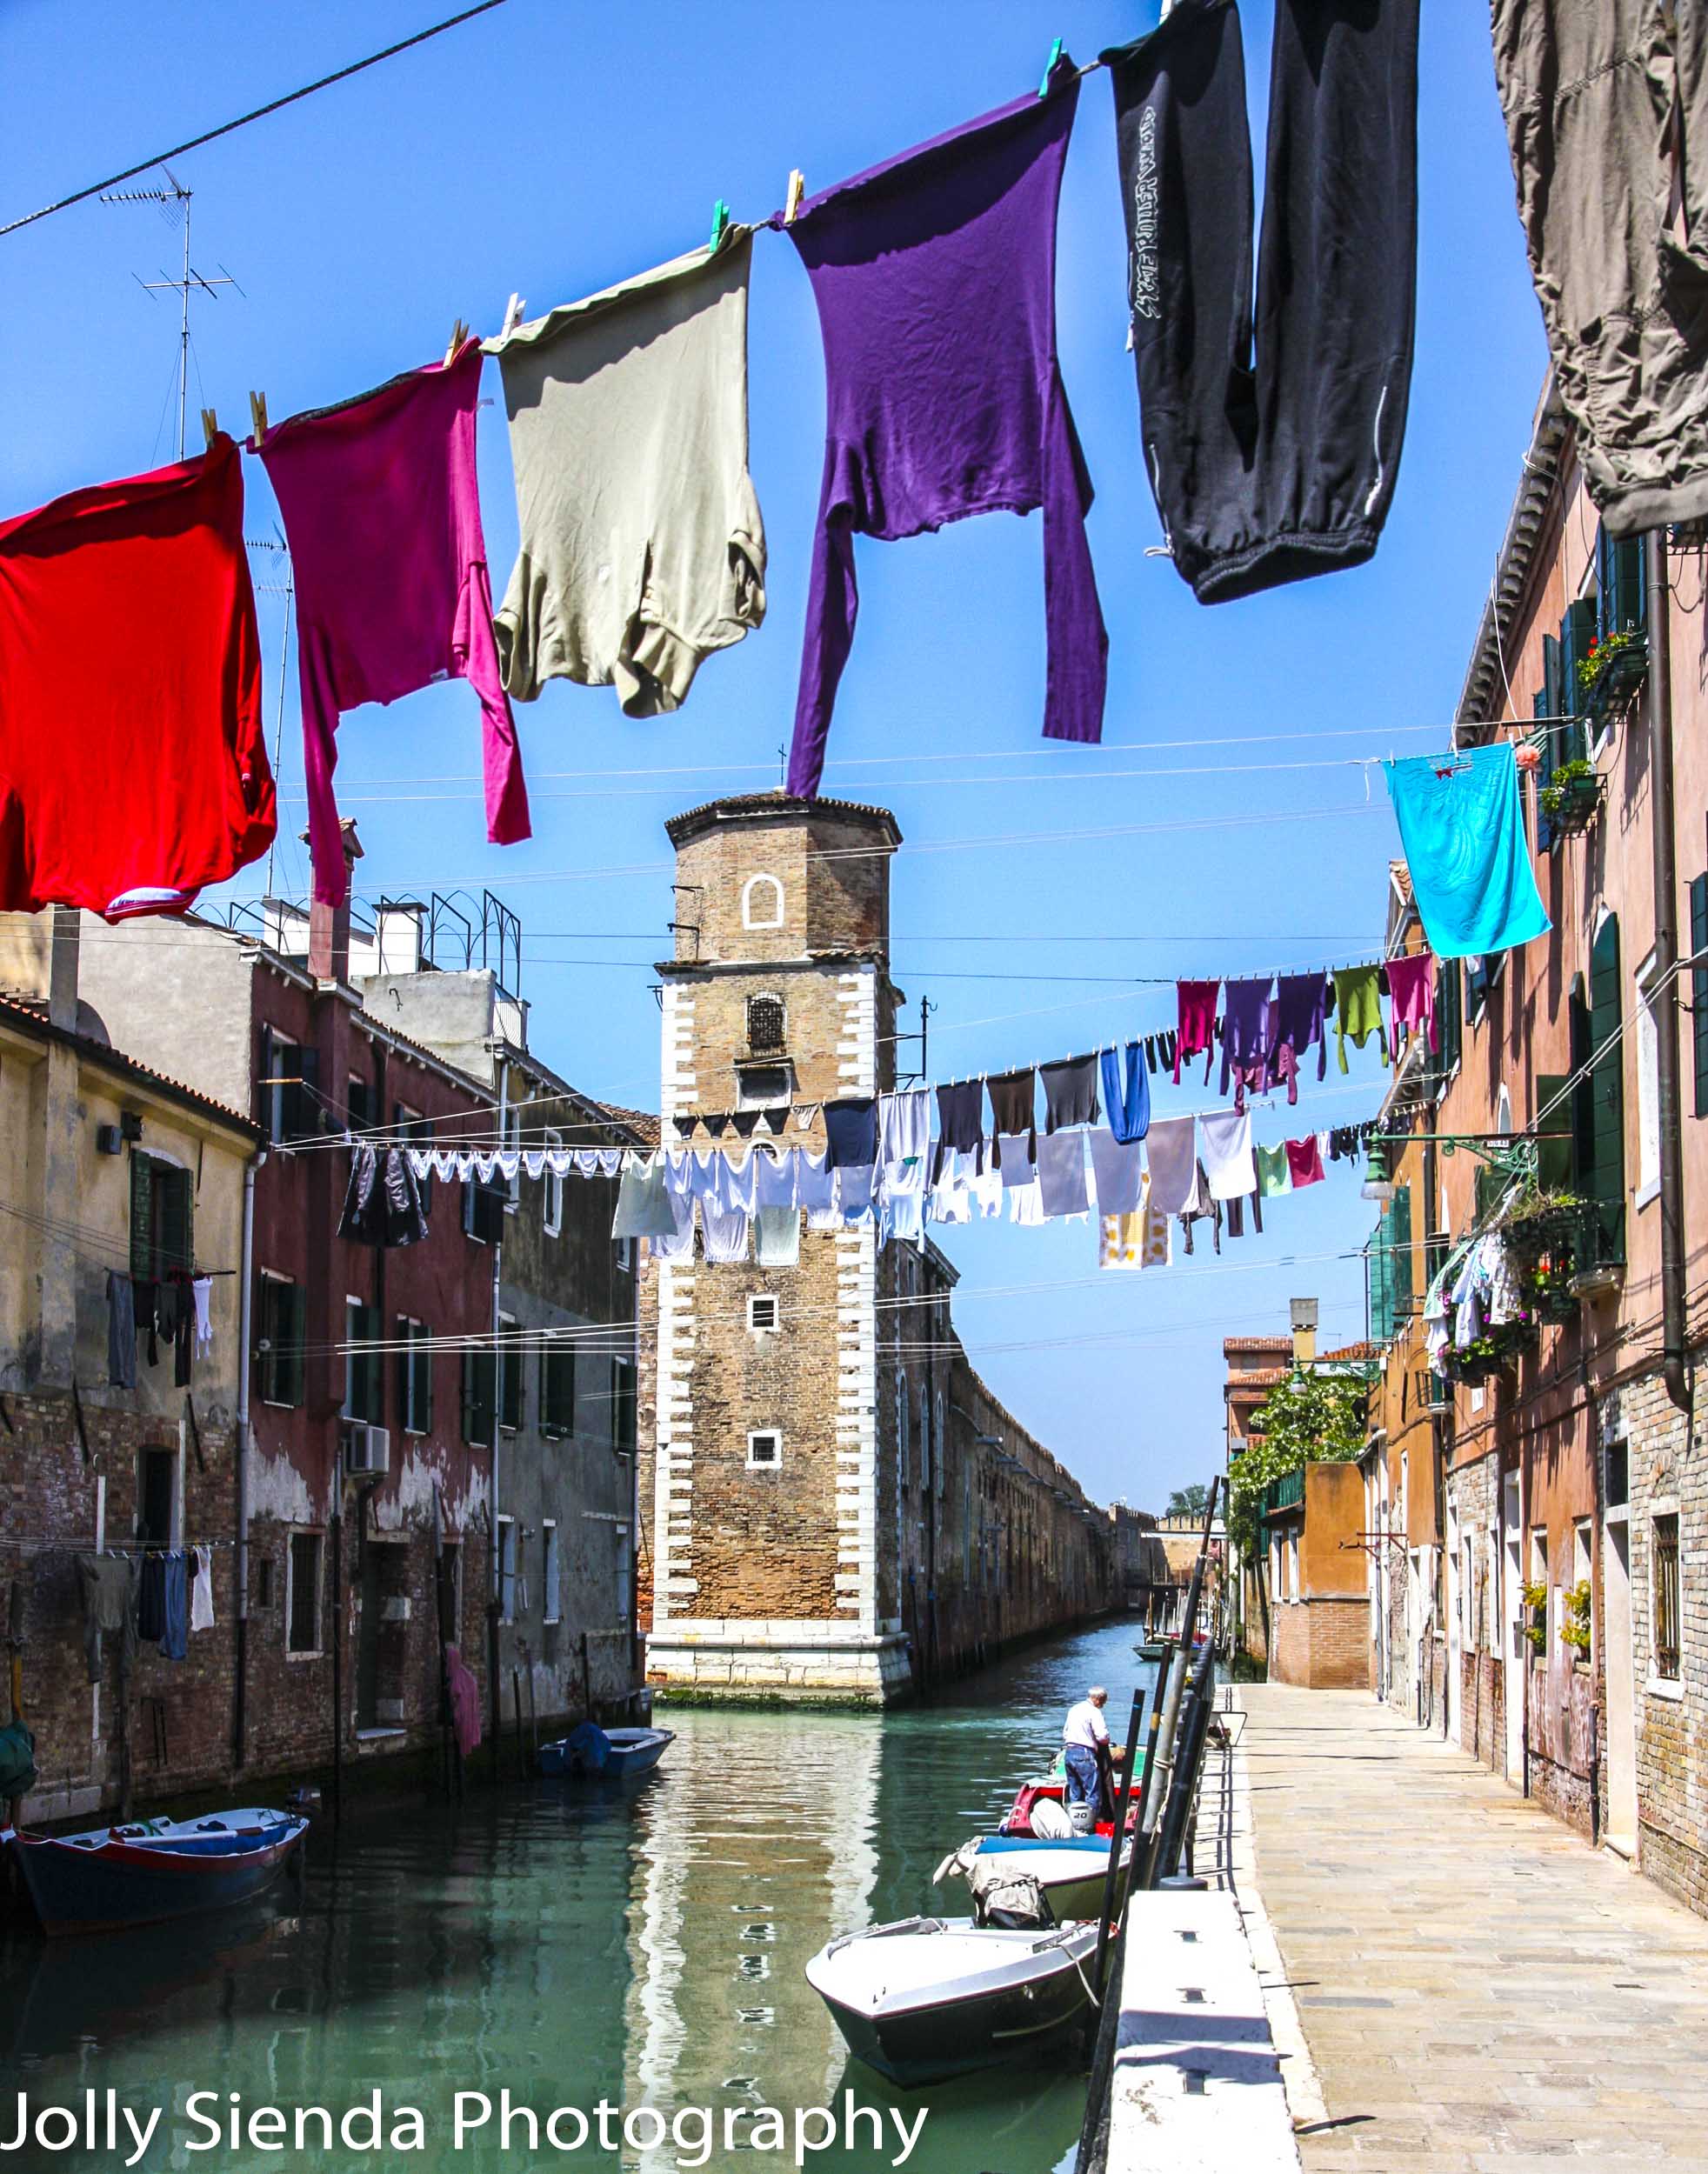 Quite Venetian canal with hanging laundry, boats, and a man in a